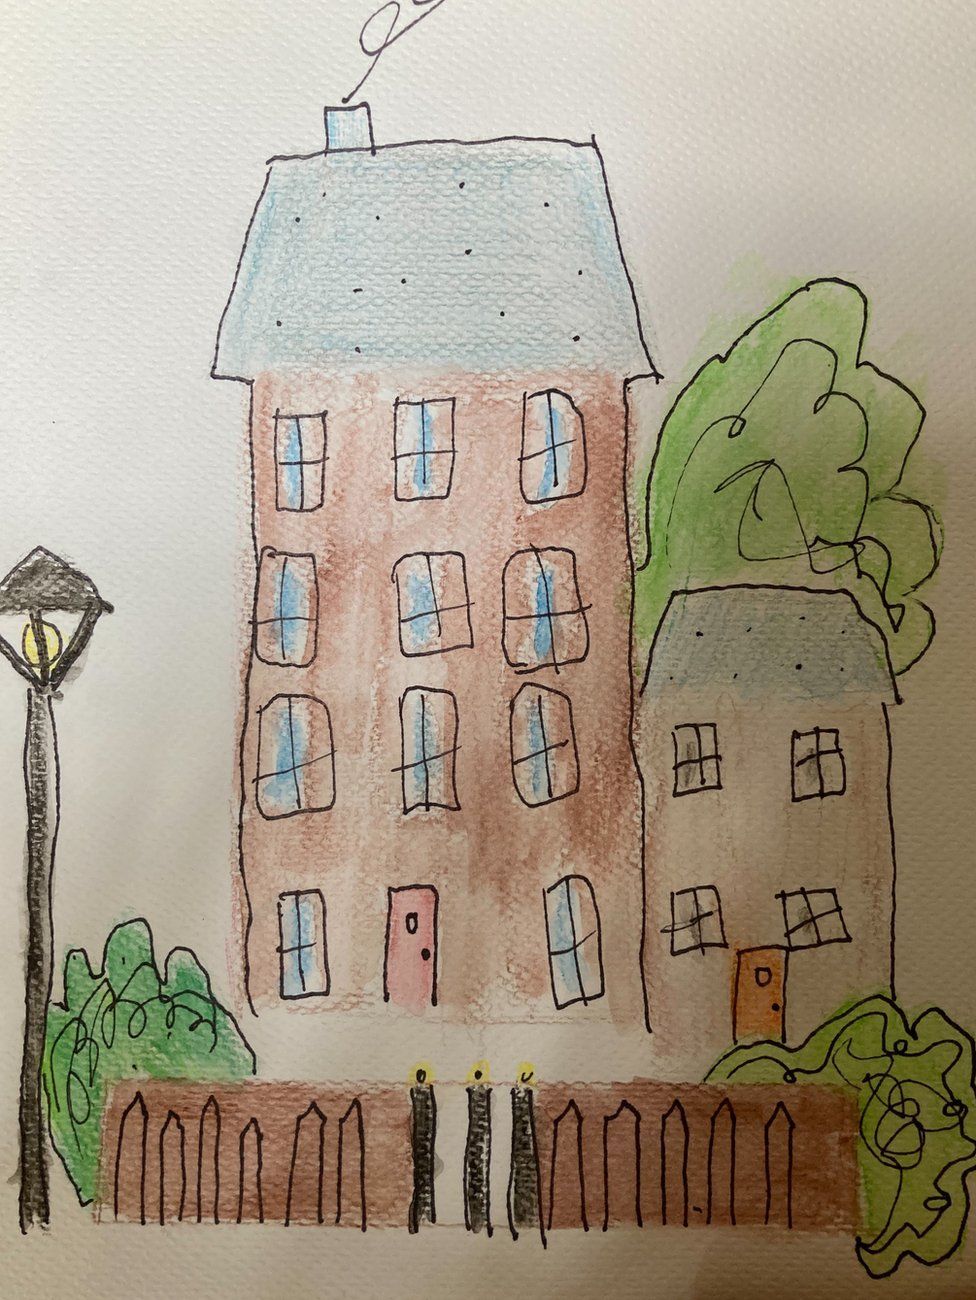 Riseley artist, 11, 'overwhelmed' with house drawing requests ...